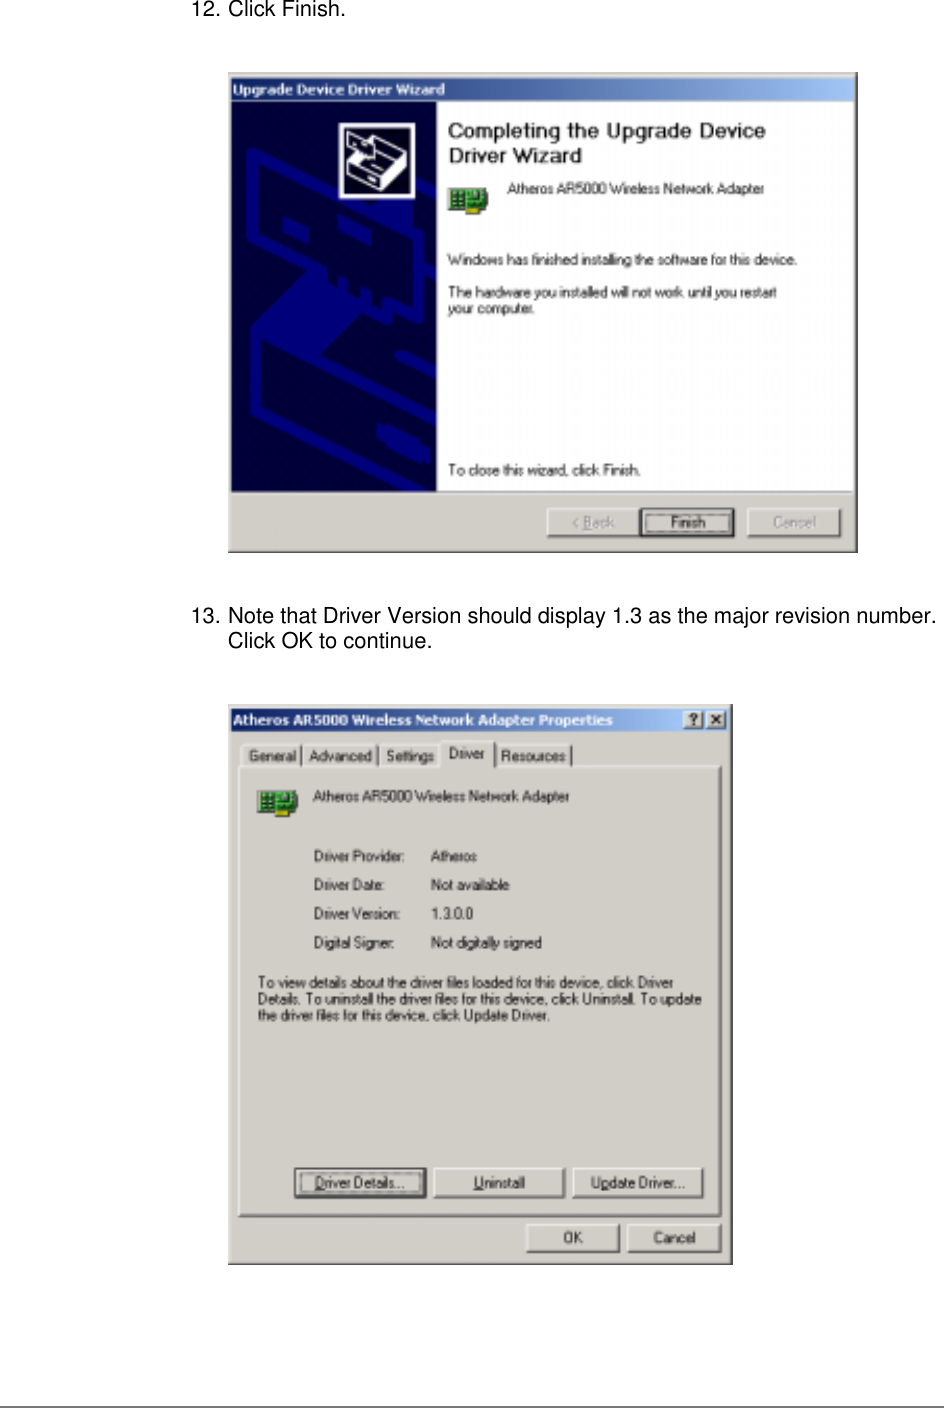 12. Click Finish.13. Note that Driver Version should display 1.3 as the major revision number.Click OK to continue.